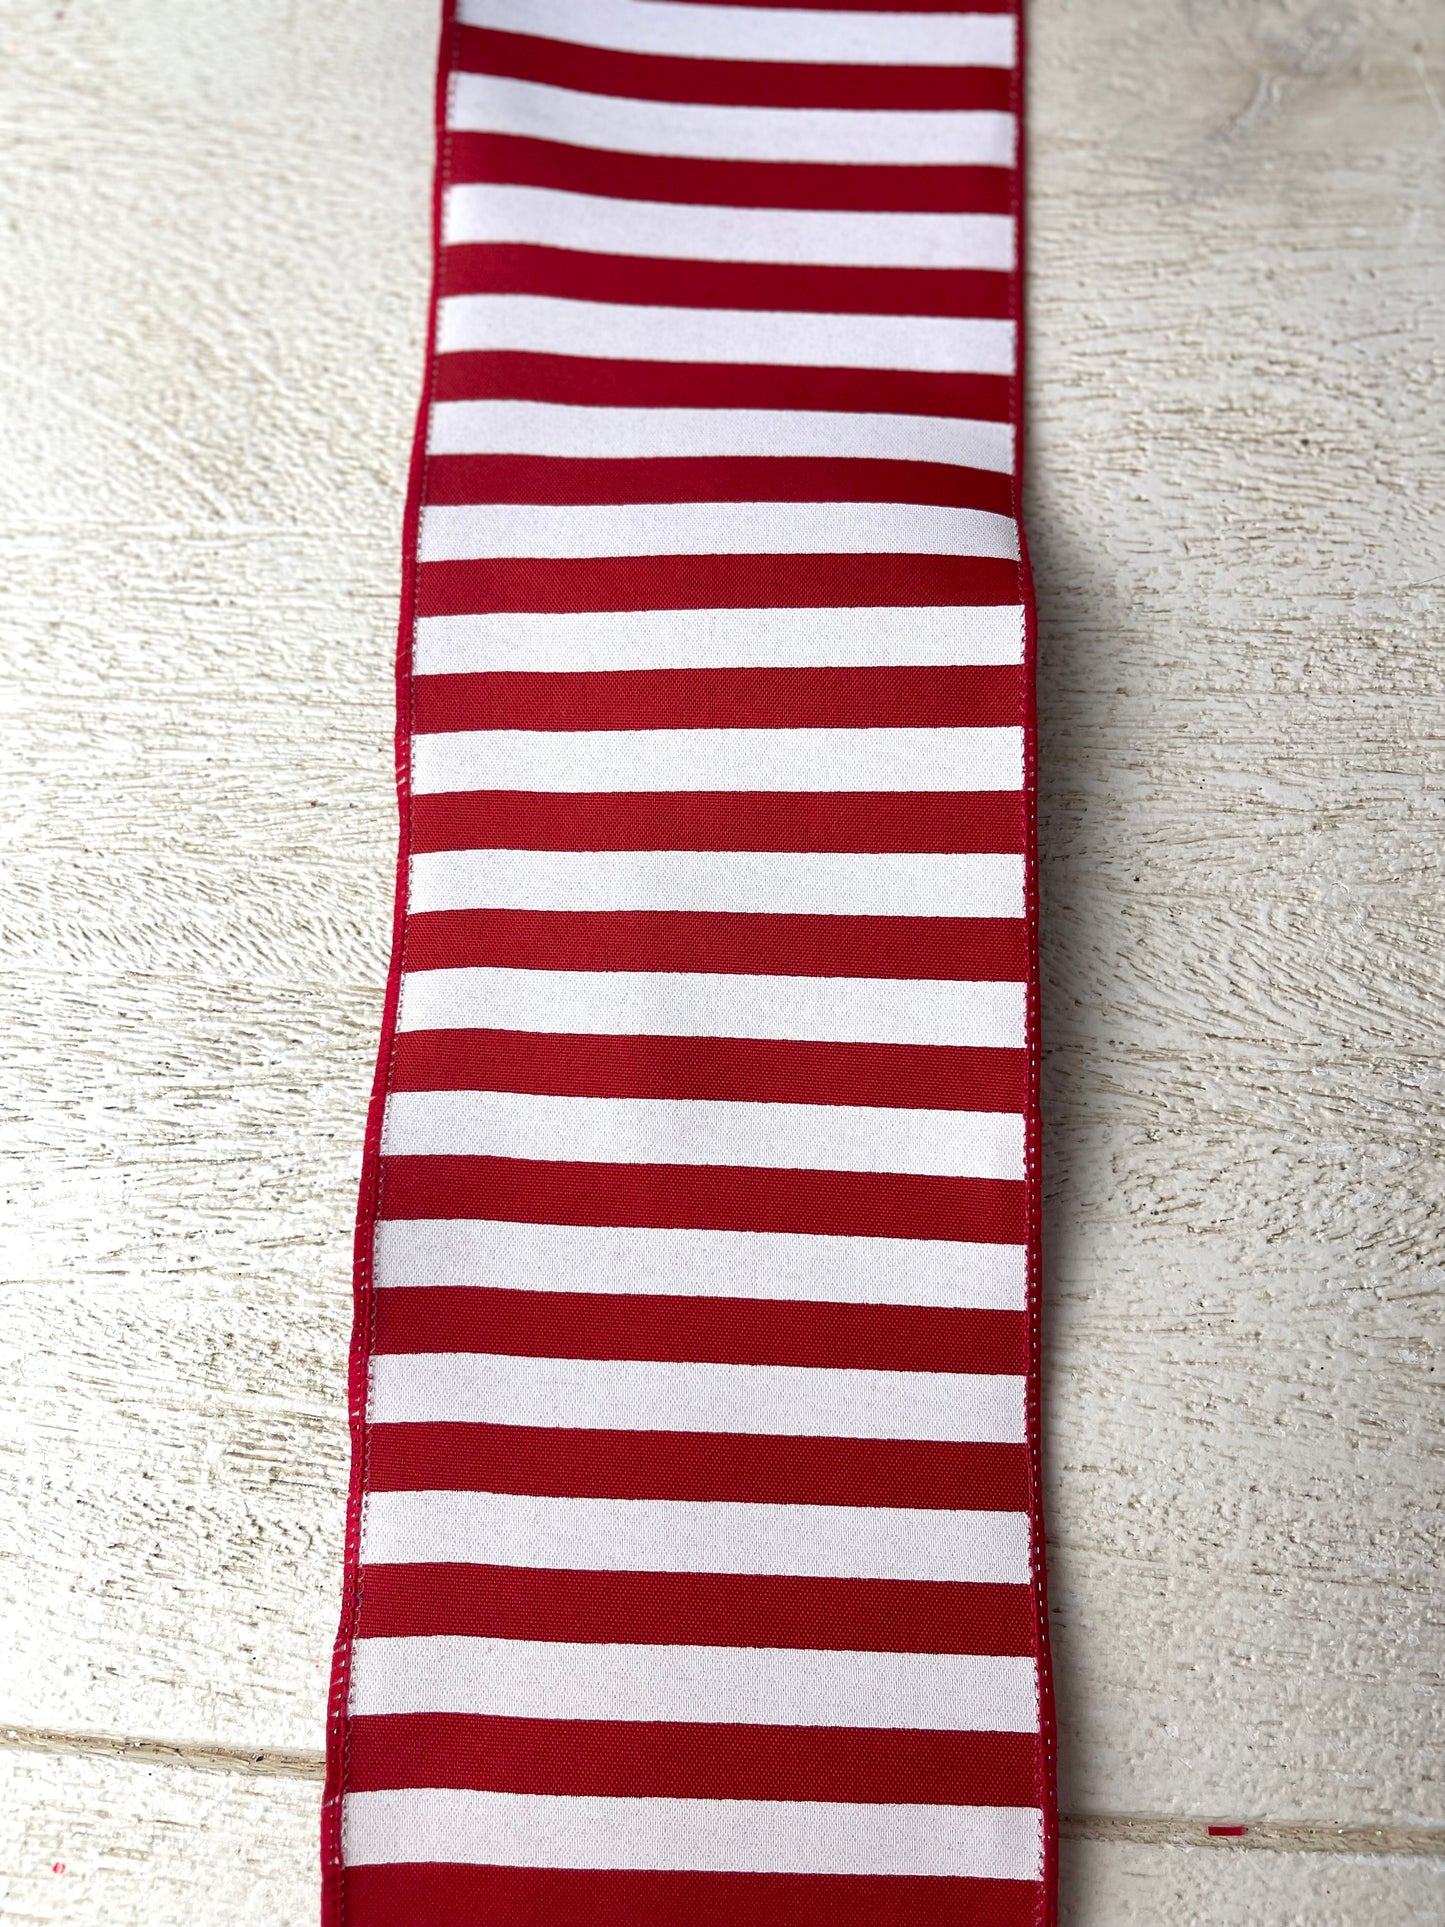 4 Inch By 10 Yard Stars And Stripes Double Sided Ribbon